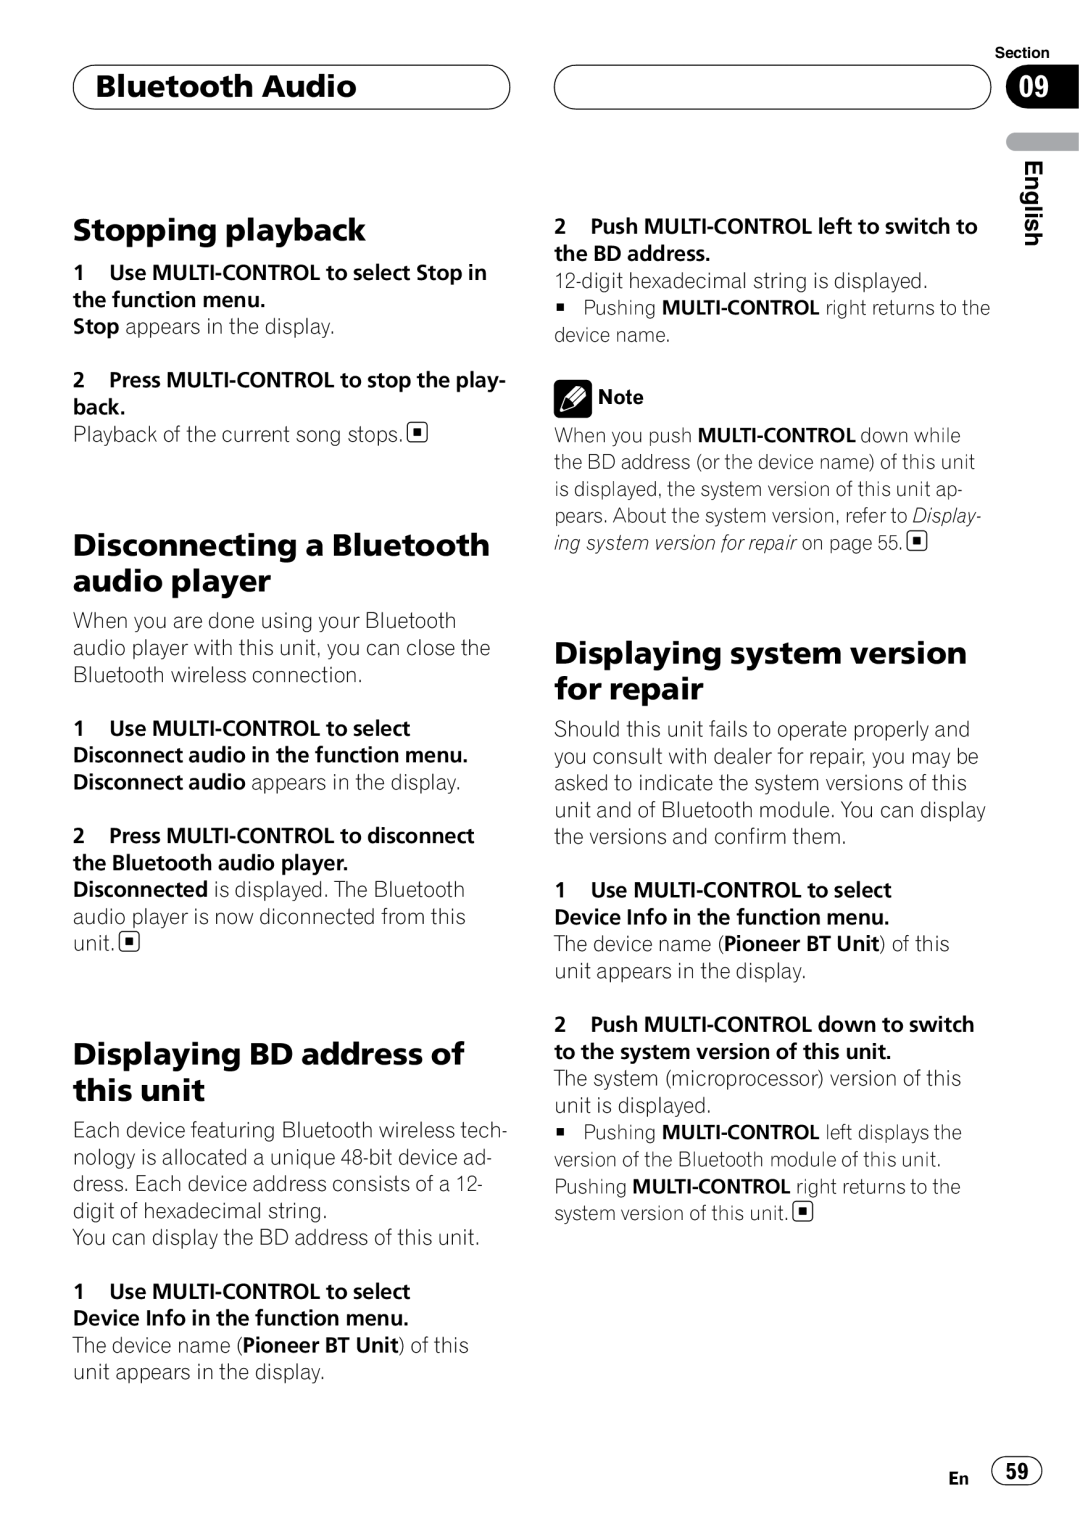 Pioneer DEH-P75BT operation manual Bluetooth Audio Stopping playback, Disconnecting a Bluetooth audio player 